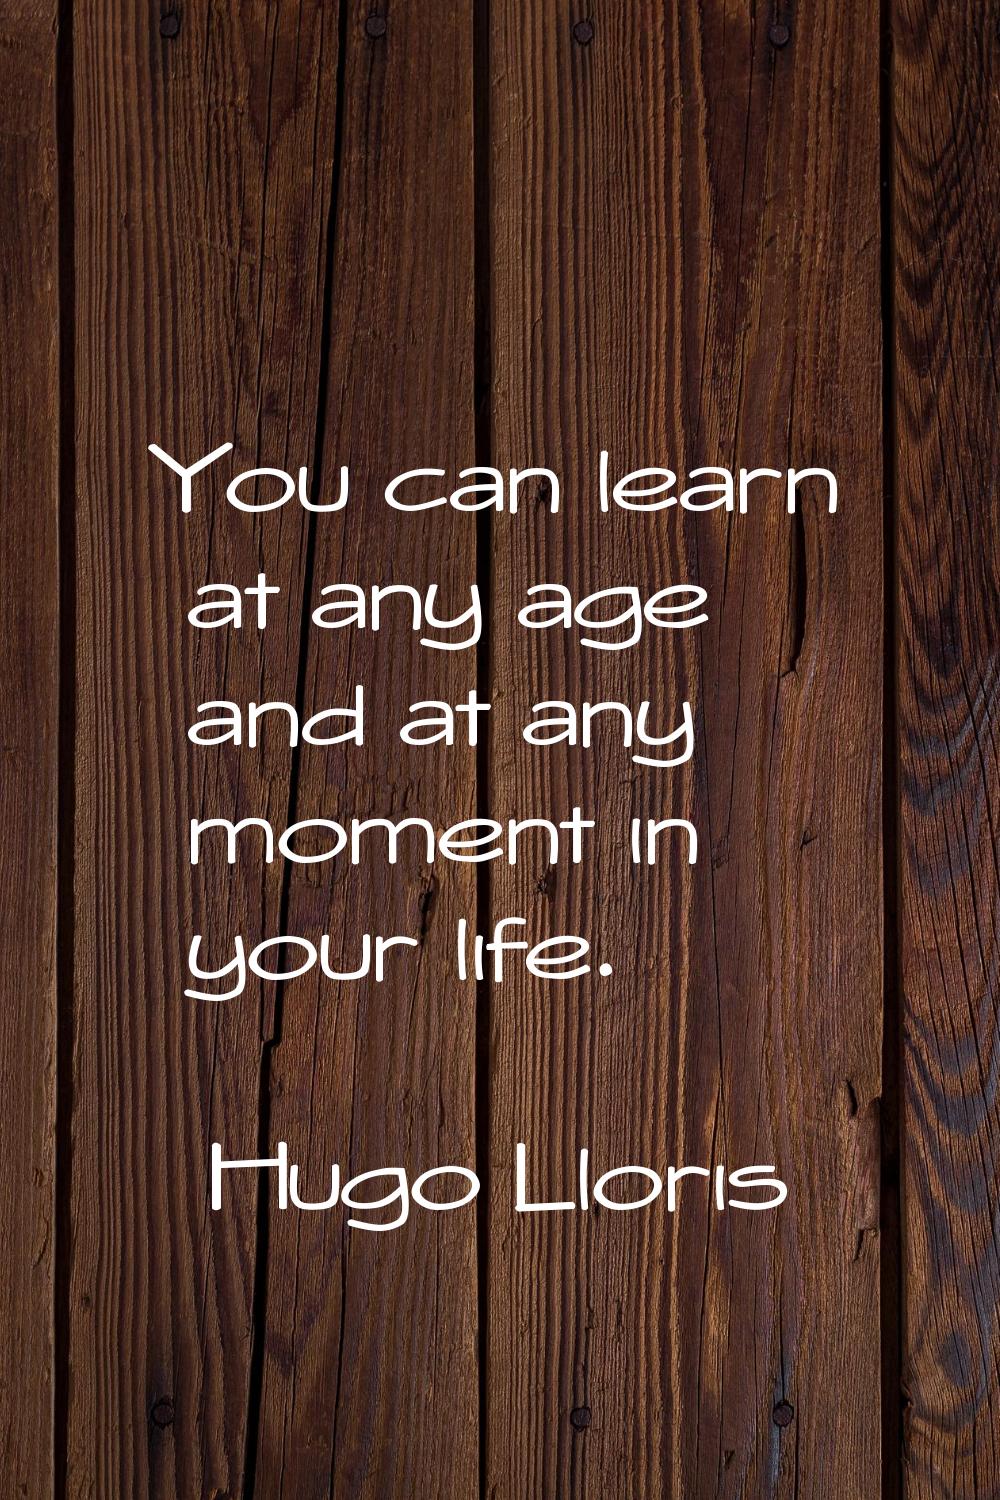 You can learn at any age and at any moment in your life.